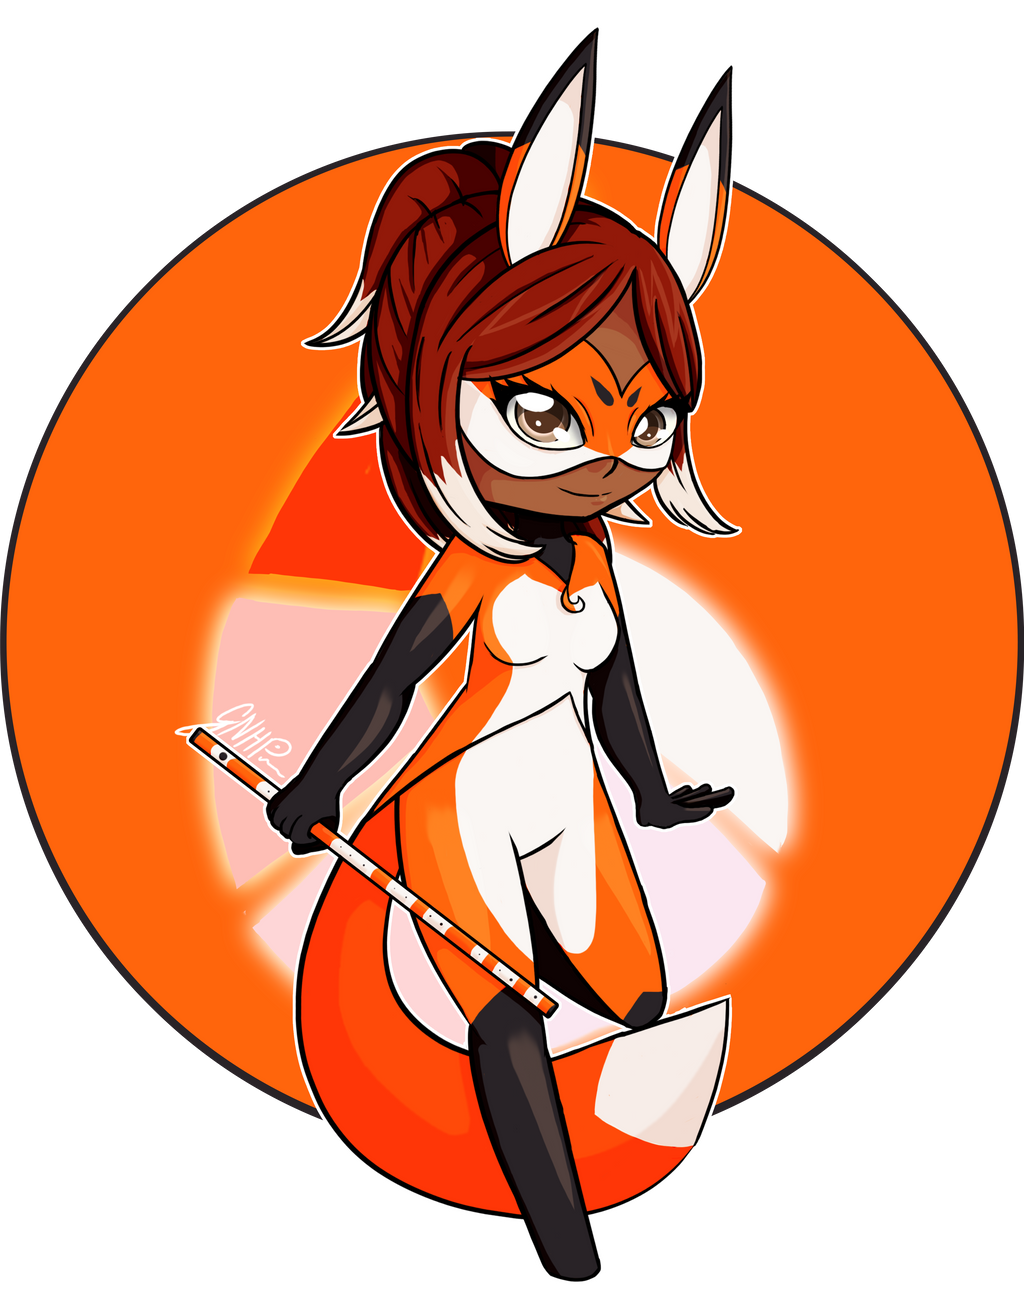 Cute Rena Rouge Chibi by gnhp on DeviantArt